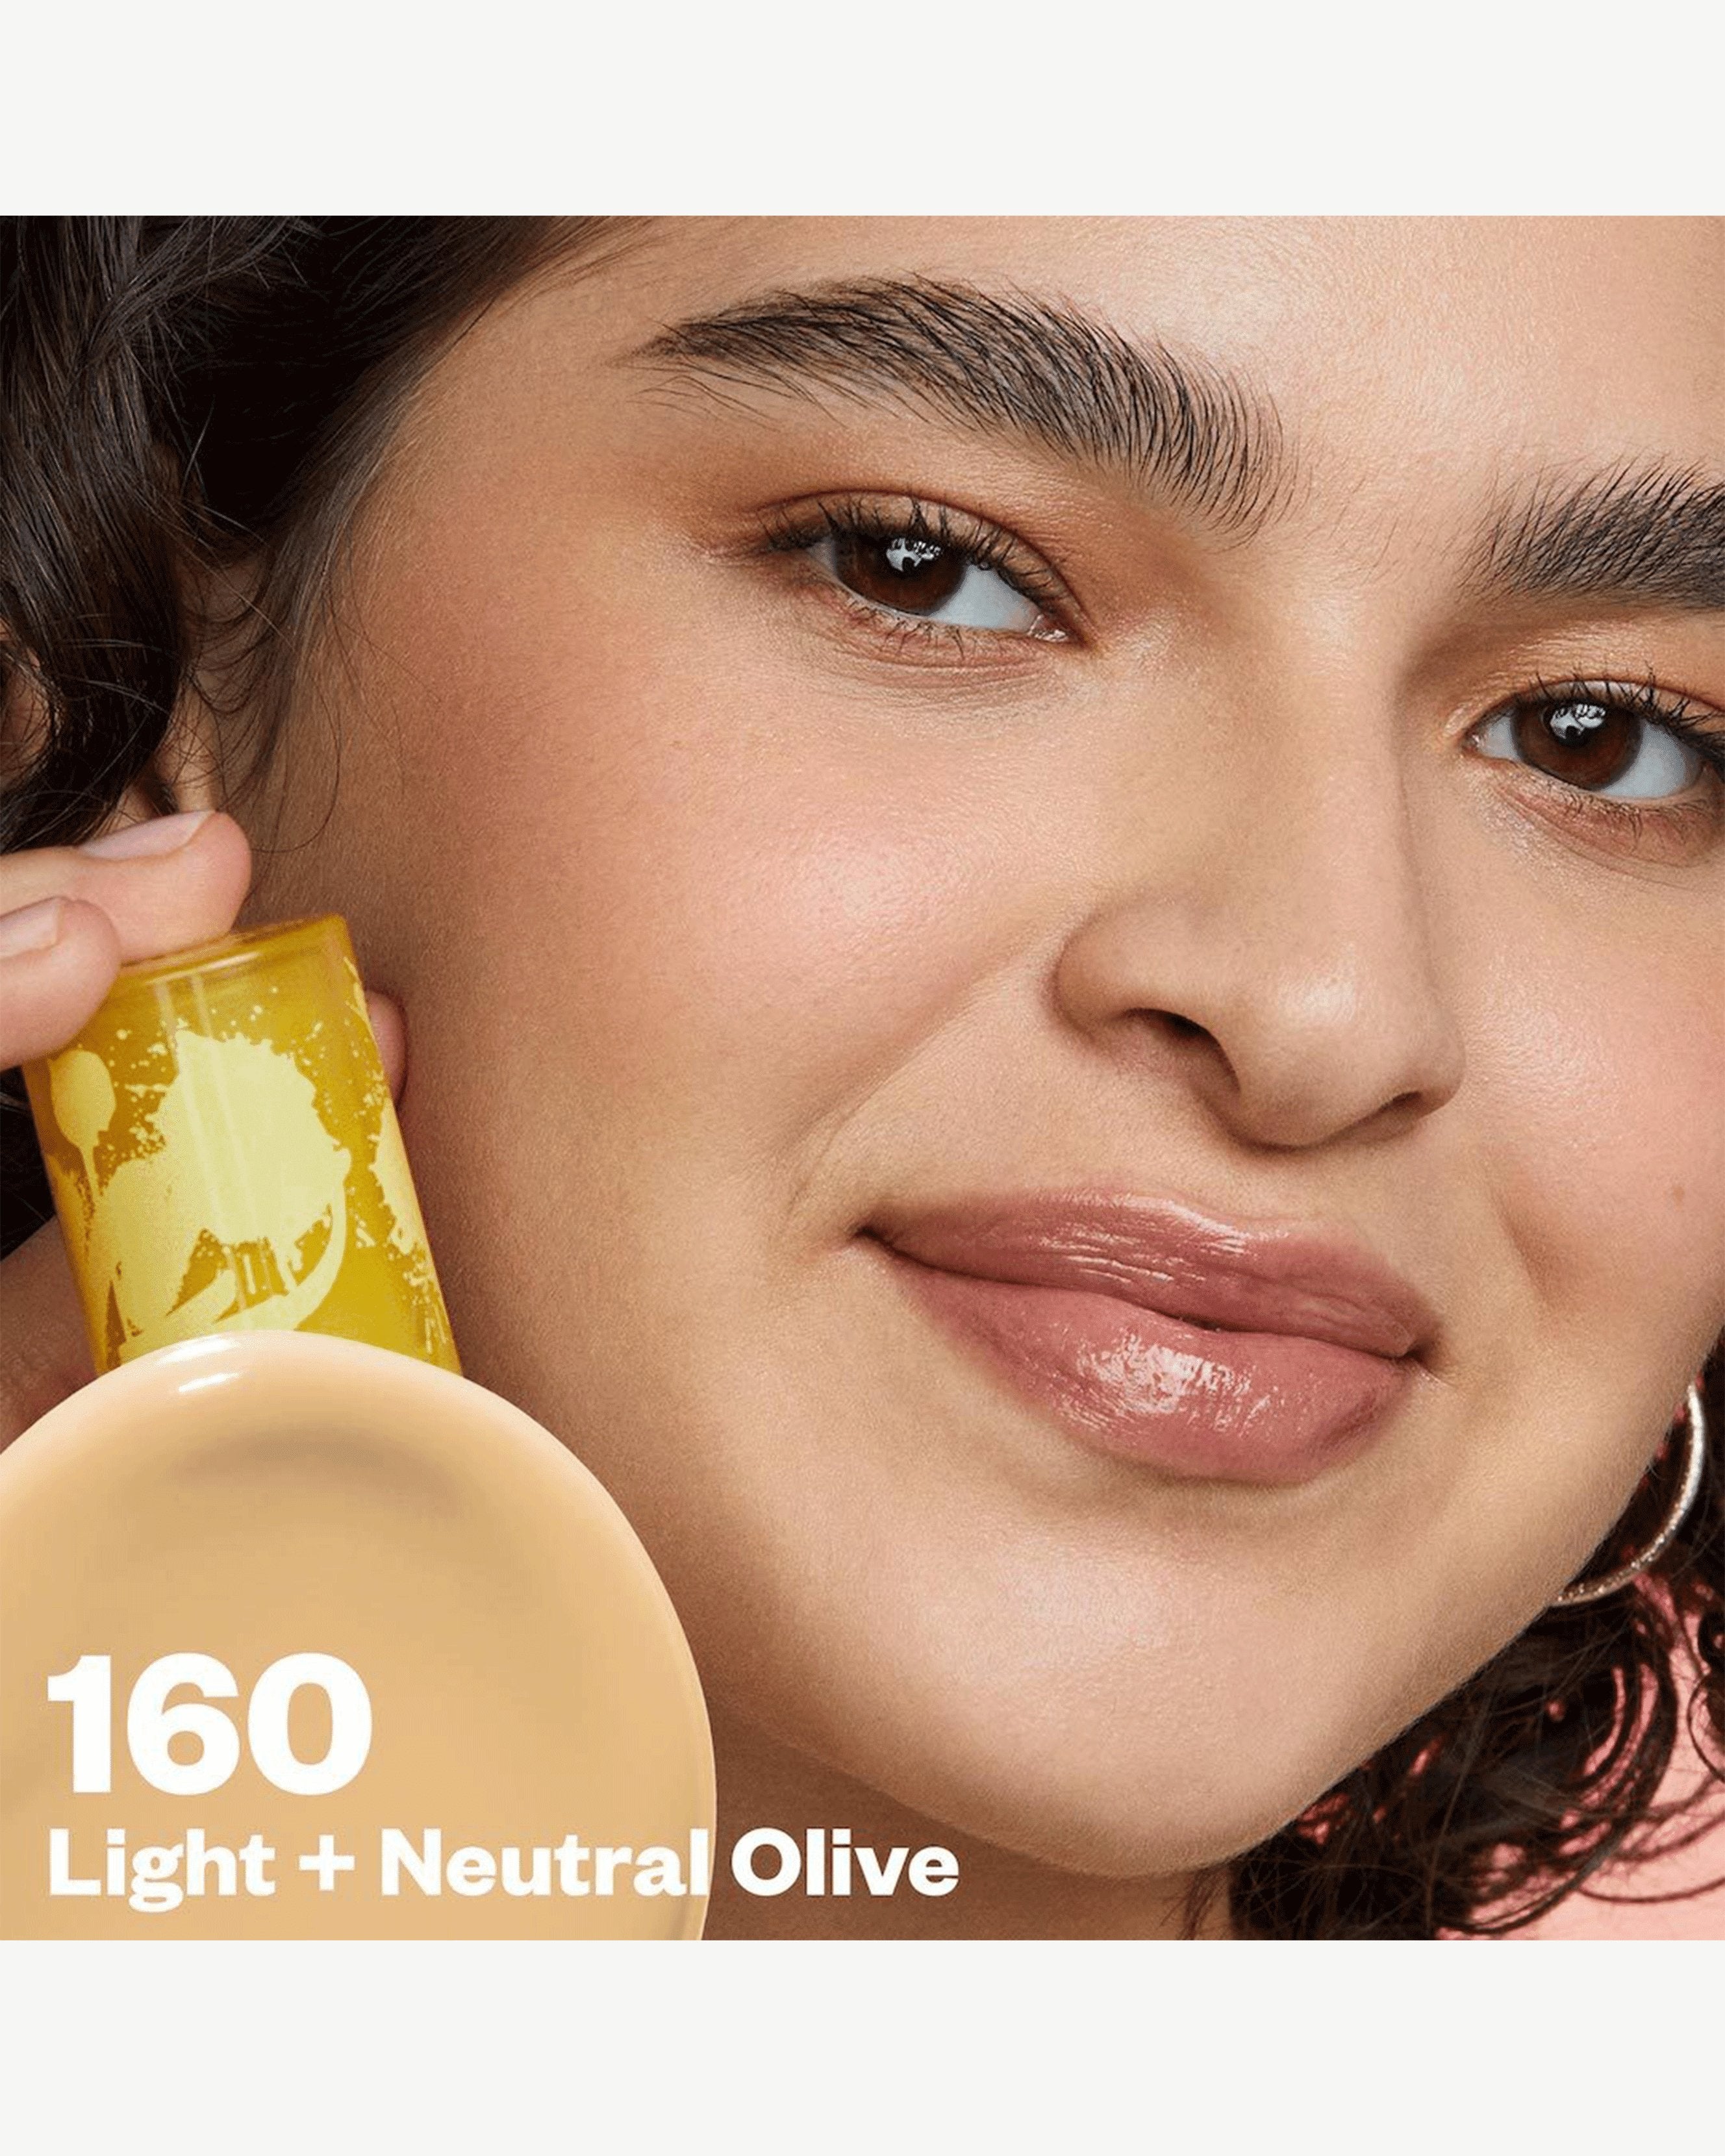 Light+ Neutral Olive 160 (light+ with neutral olive undertones)